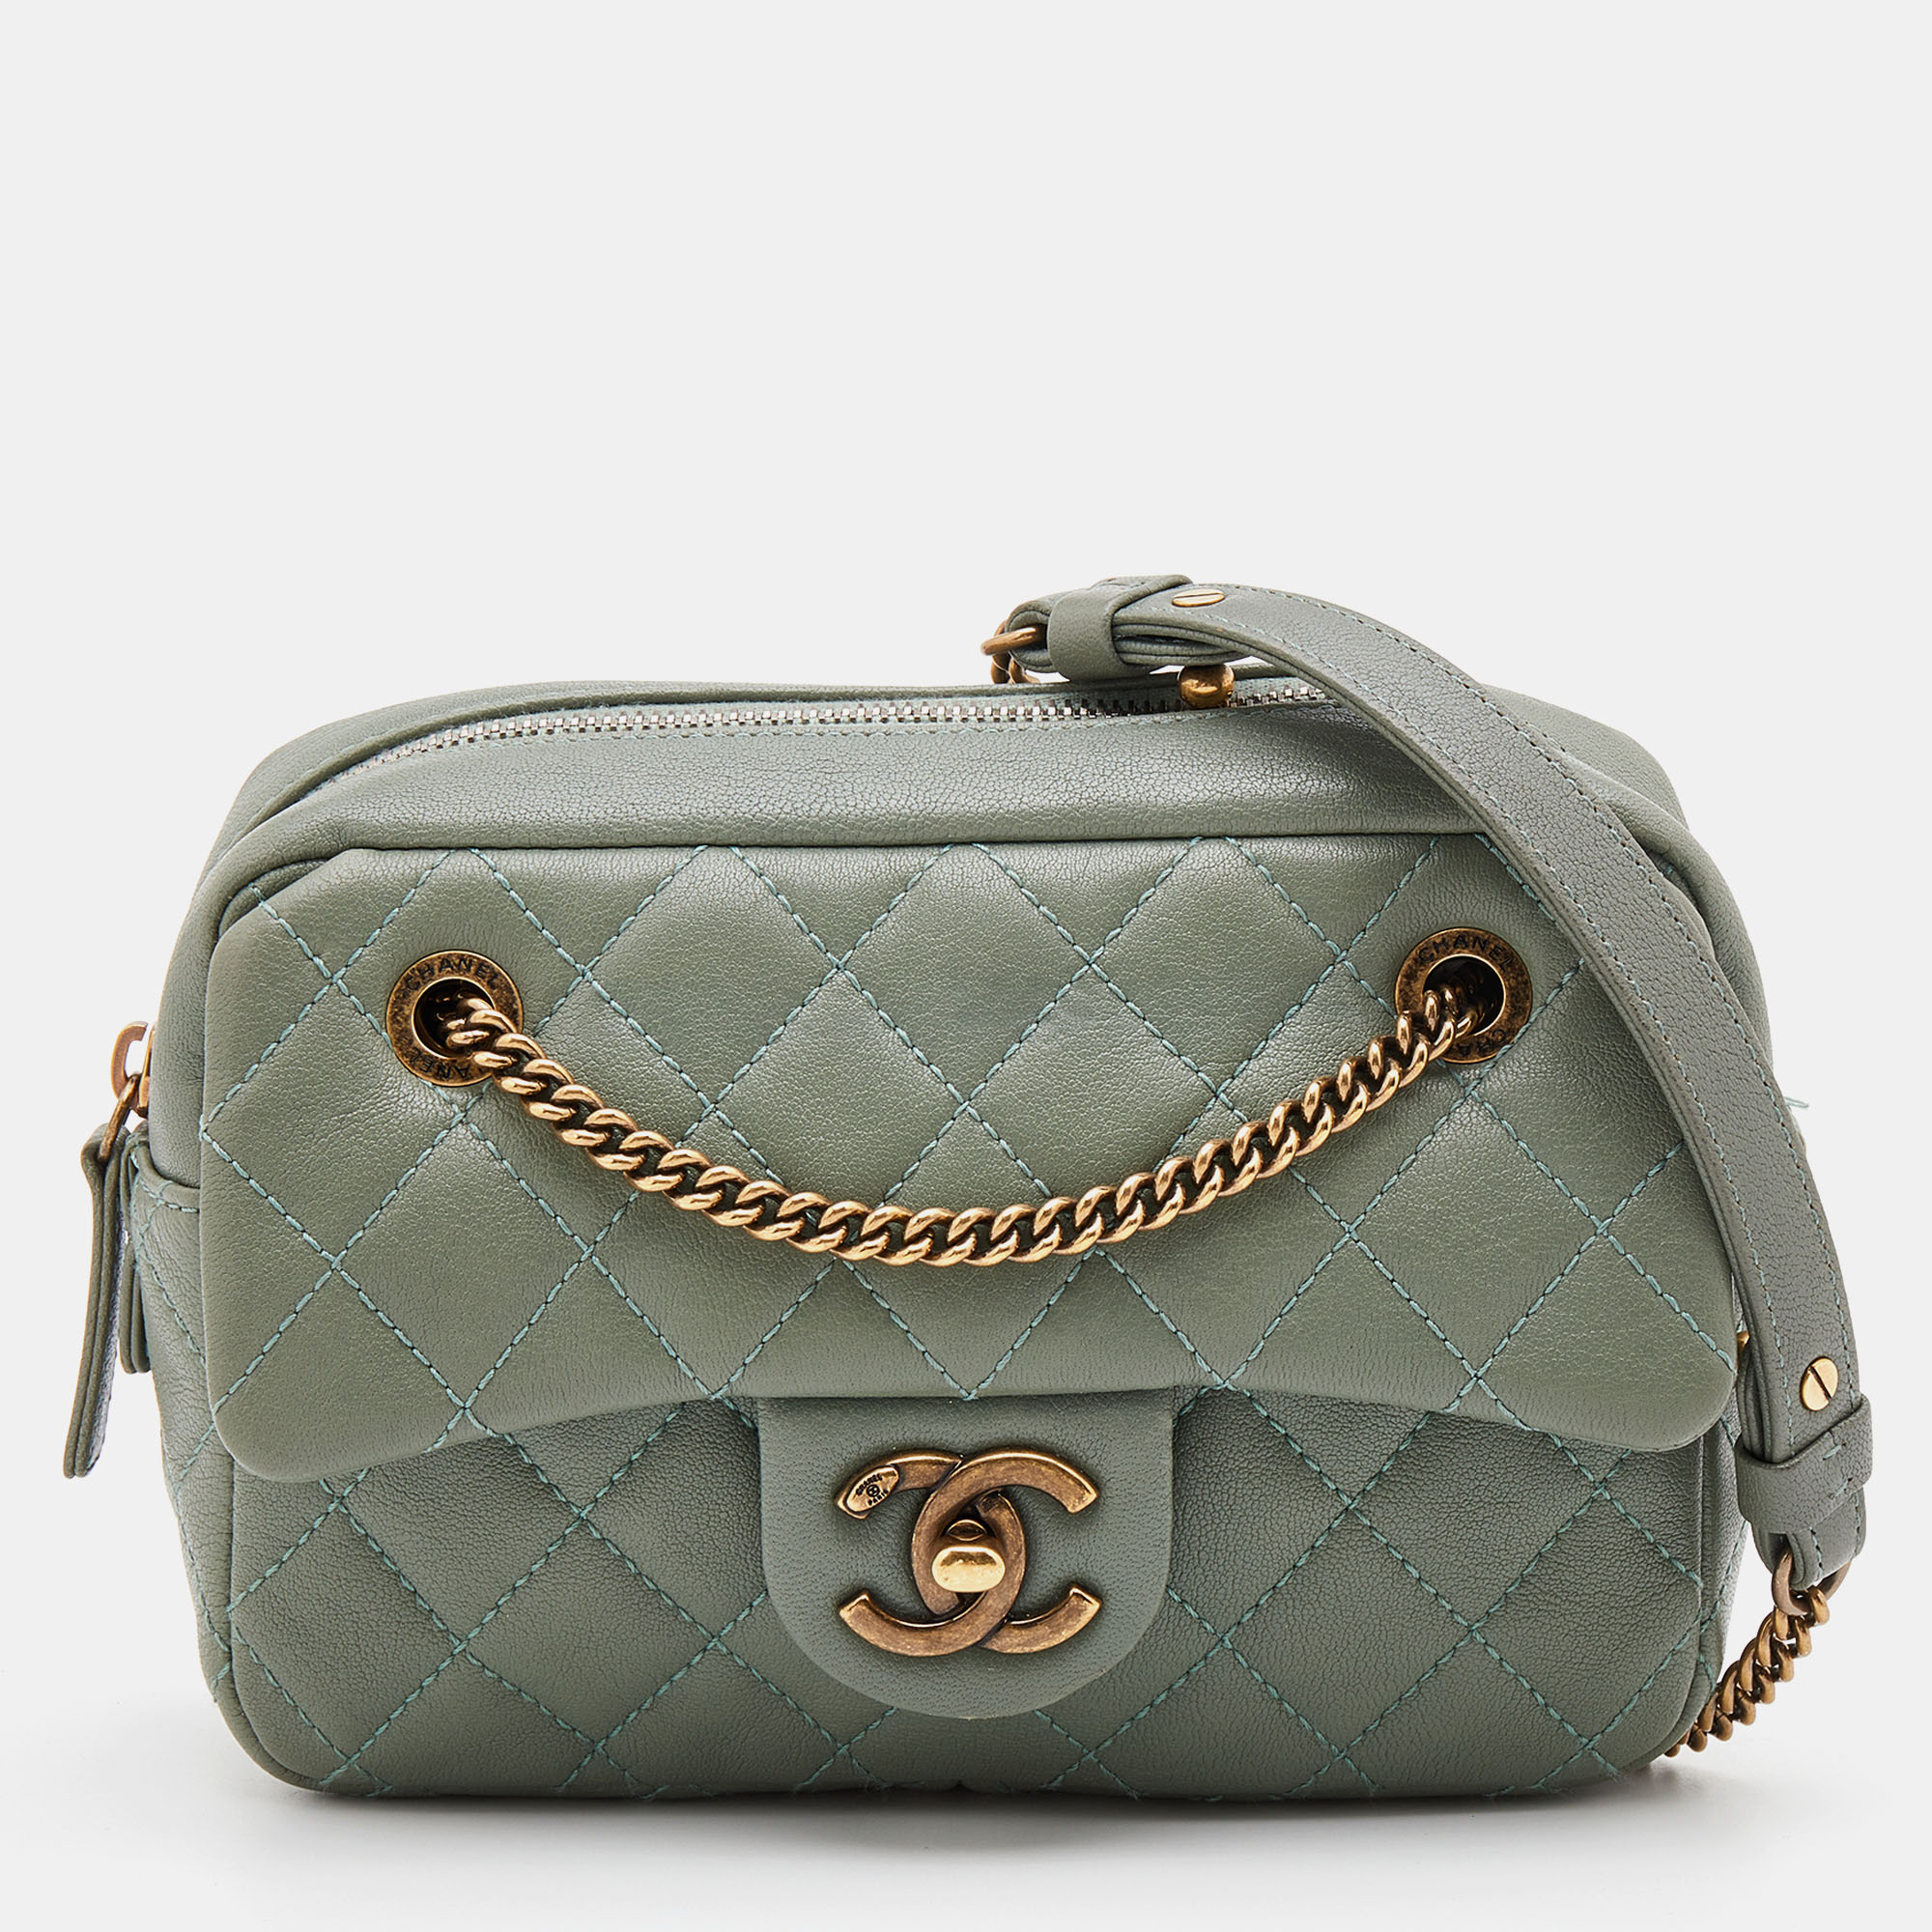 Chanel Green Quilted Leather Camera Case Flap Bag